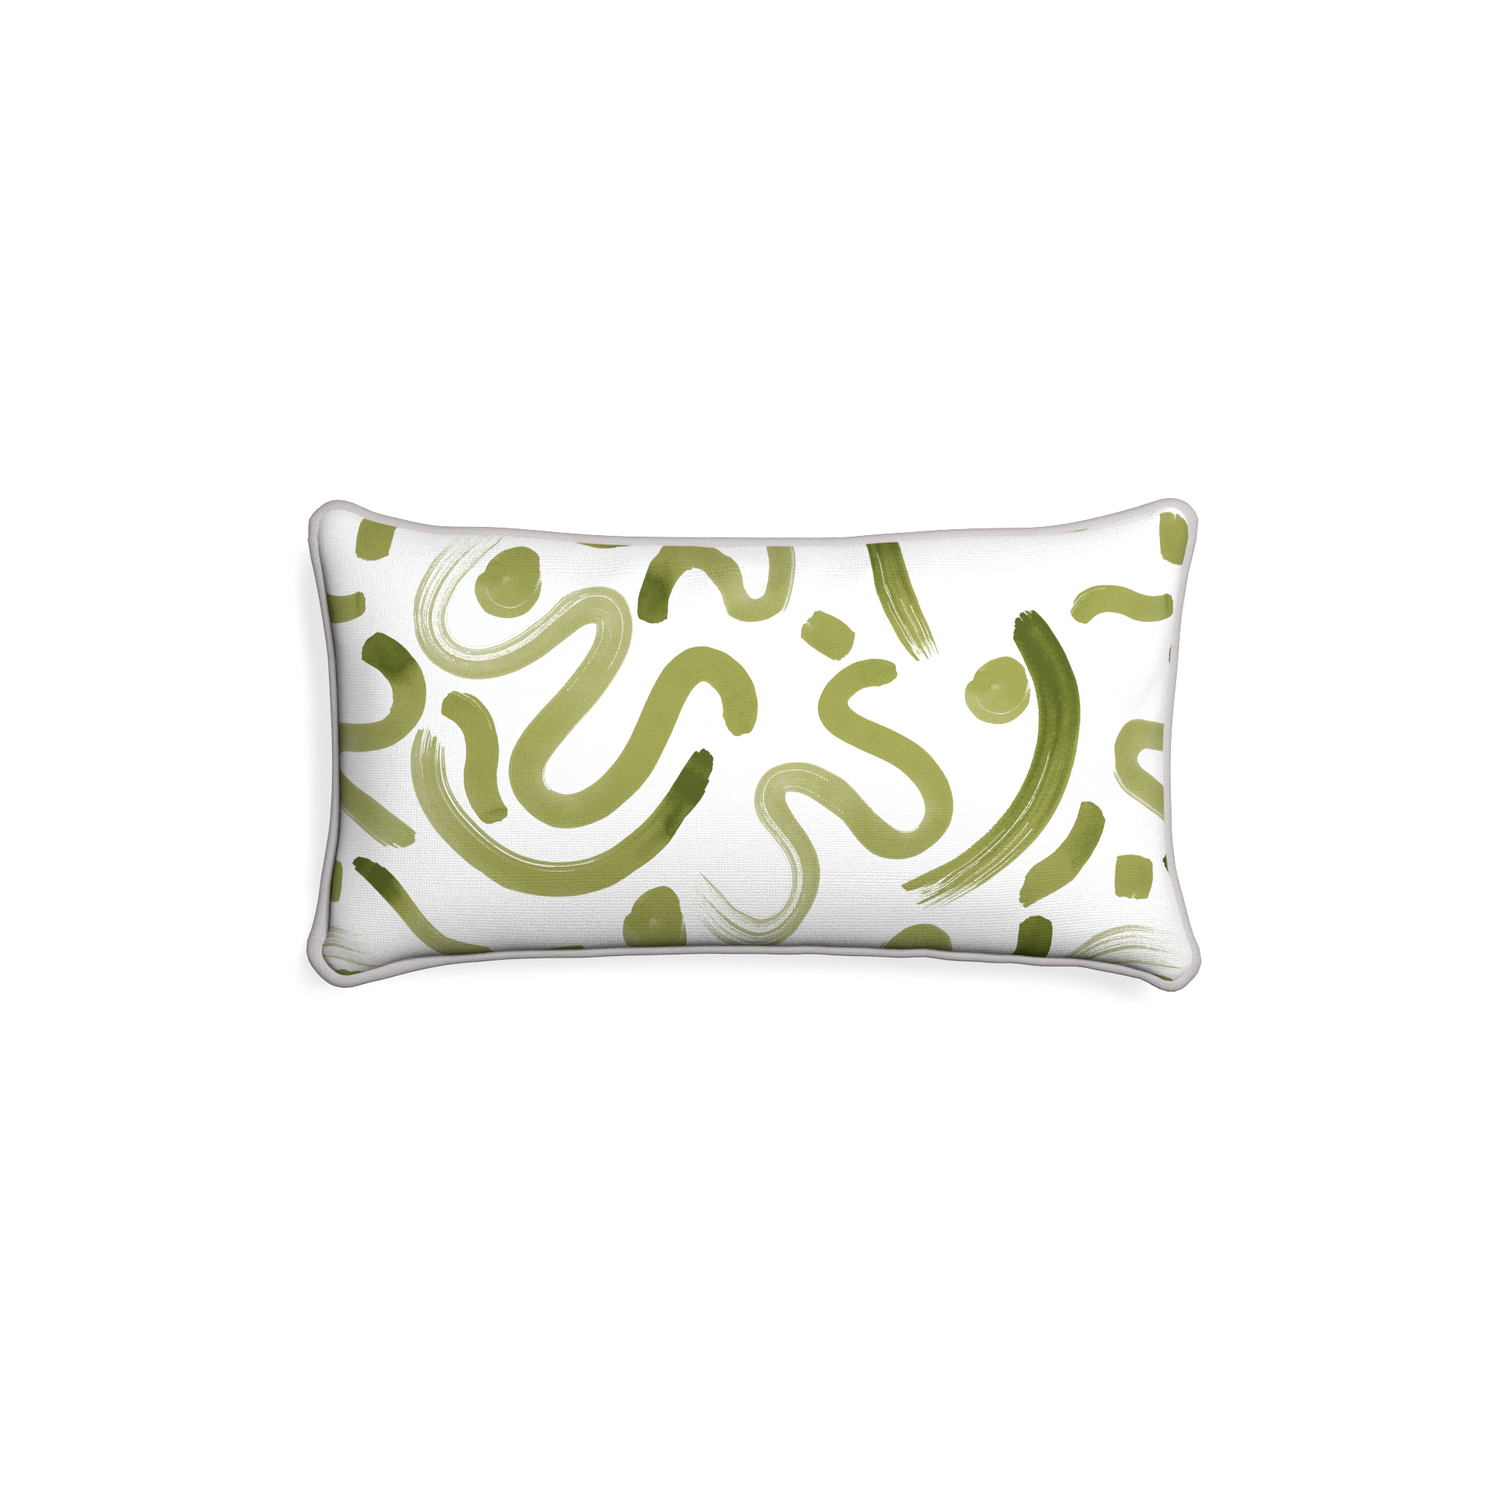 Petite-lumbar hockney moss custom moss greenpillow with pebble piping on white background